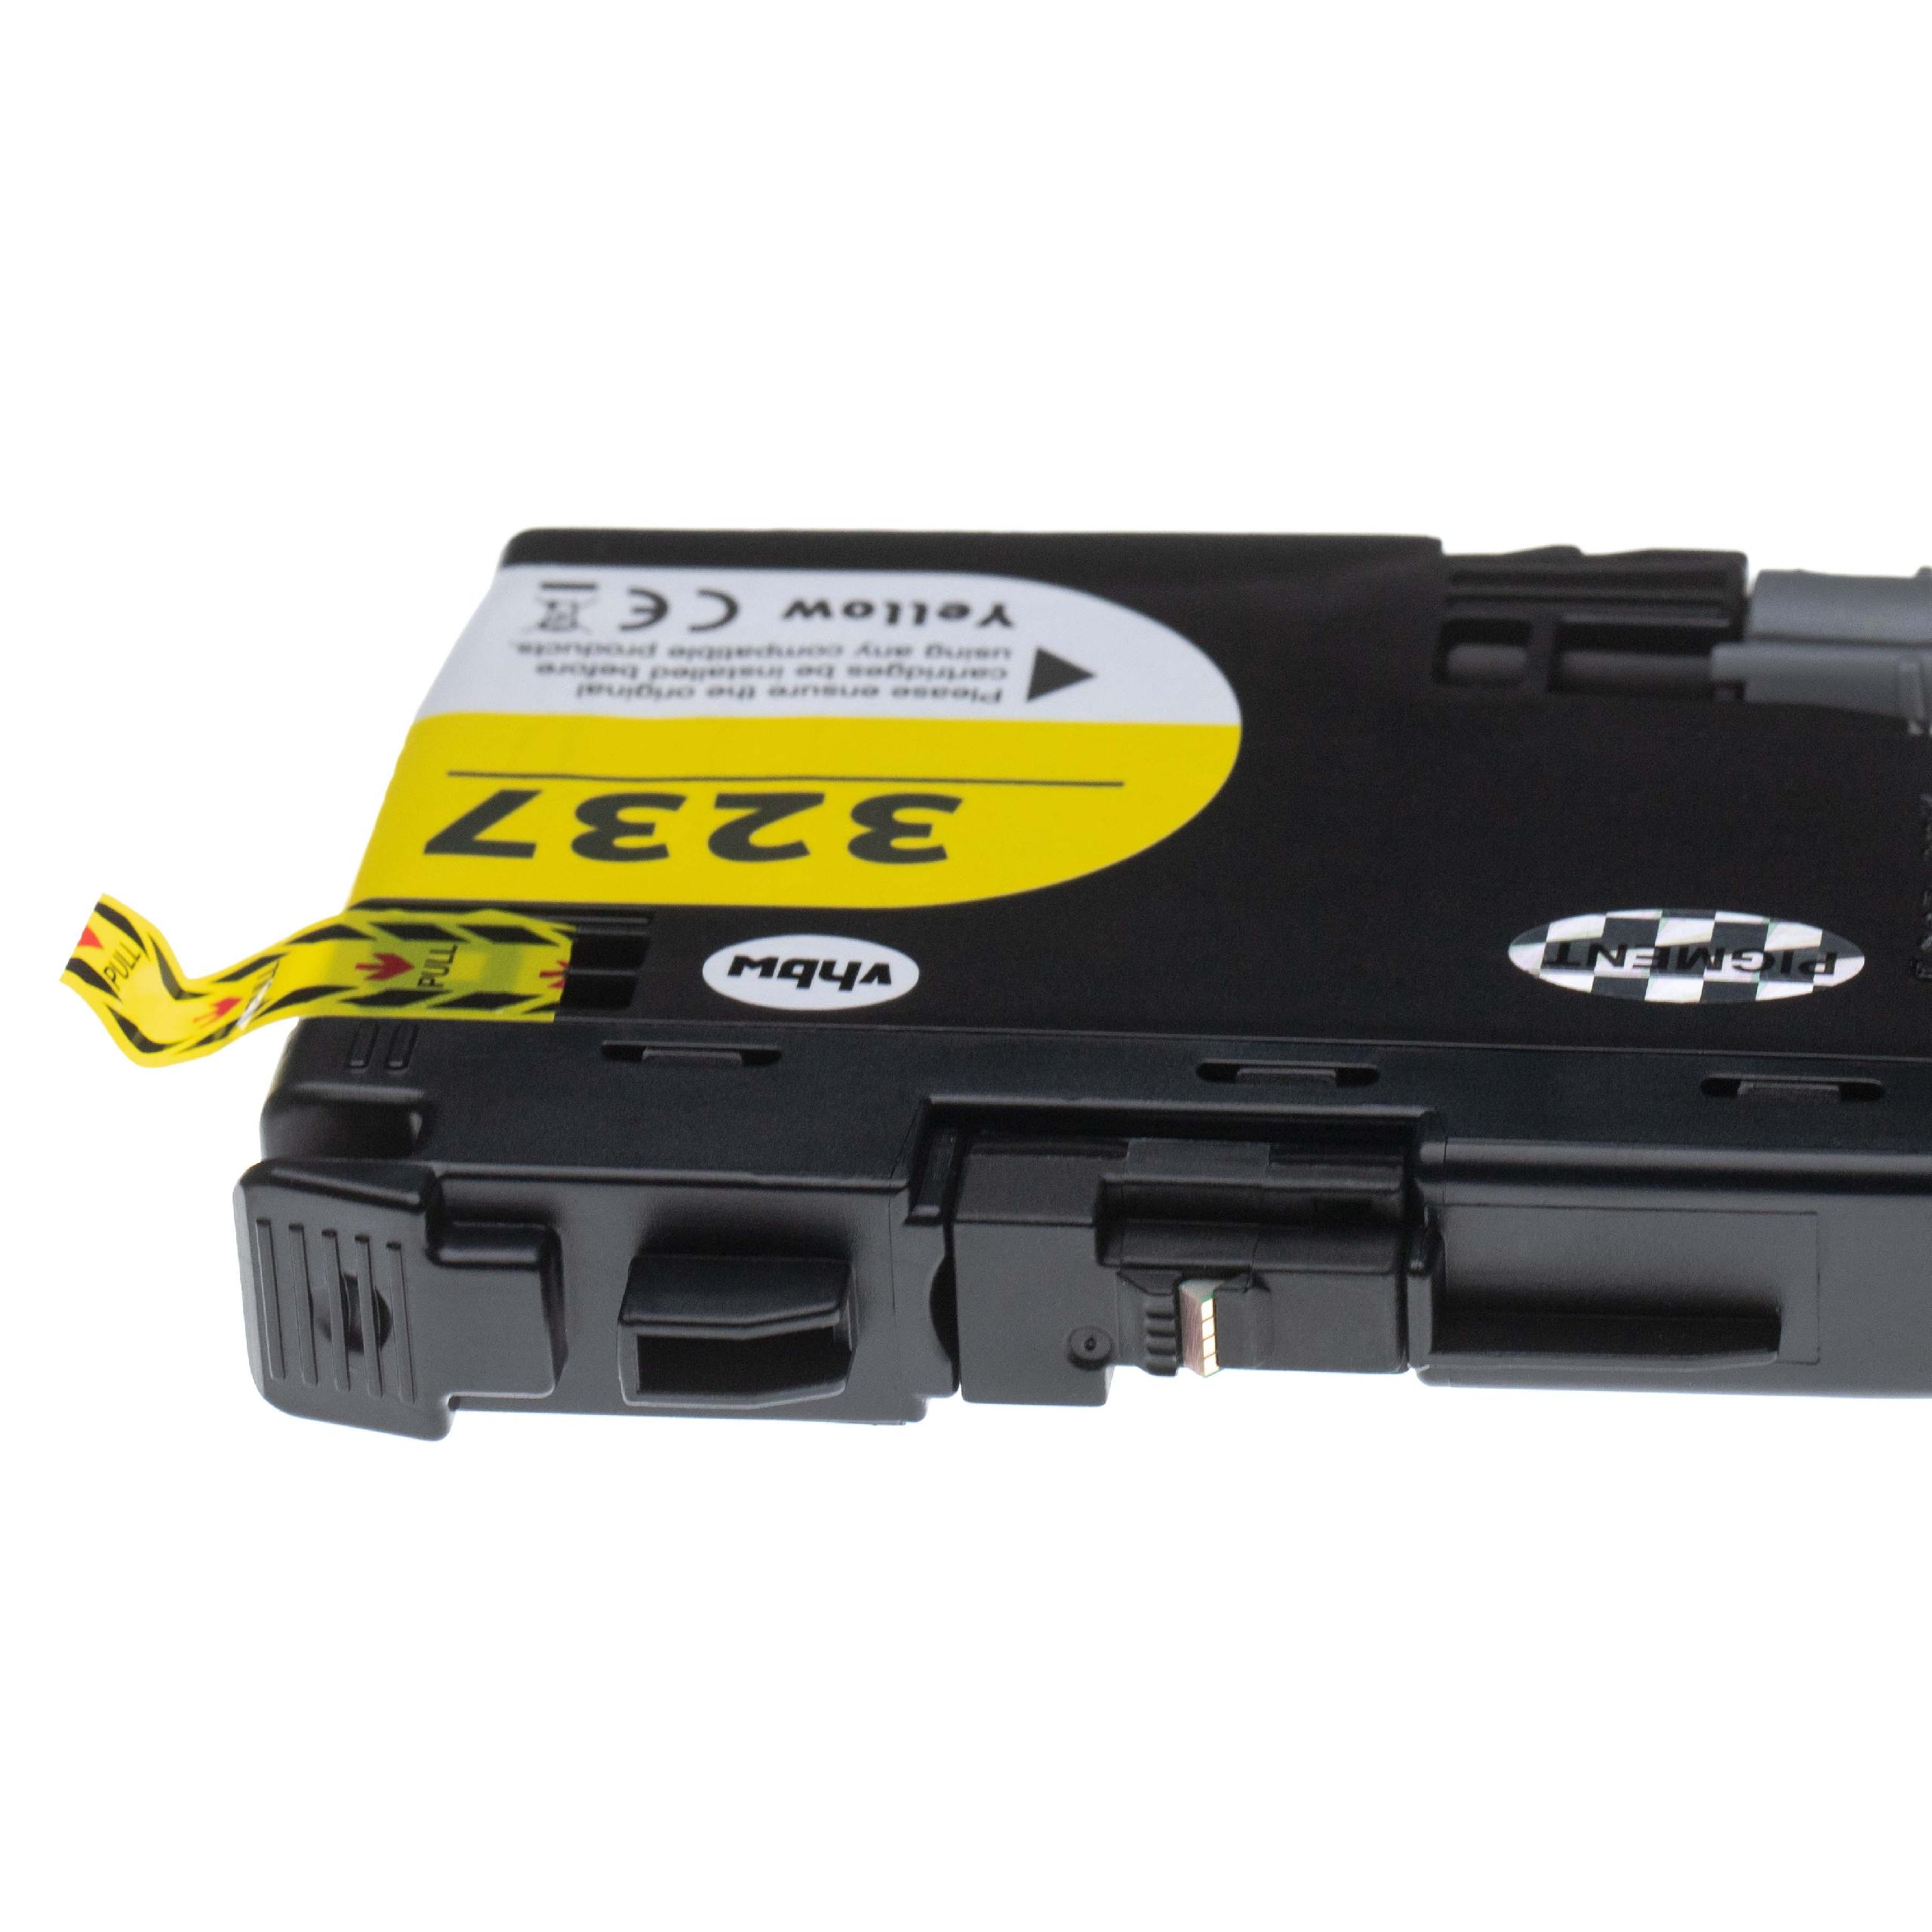 Ink Cartridge as Exchange for Brother LC3237Y, LC-3237Y for Brother Printer - Yellow 18.5 ml + Chip